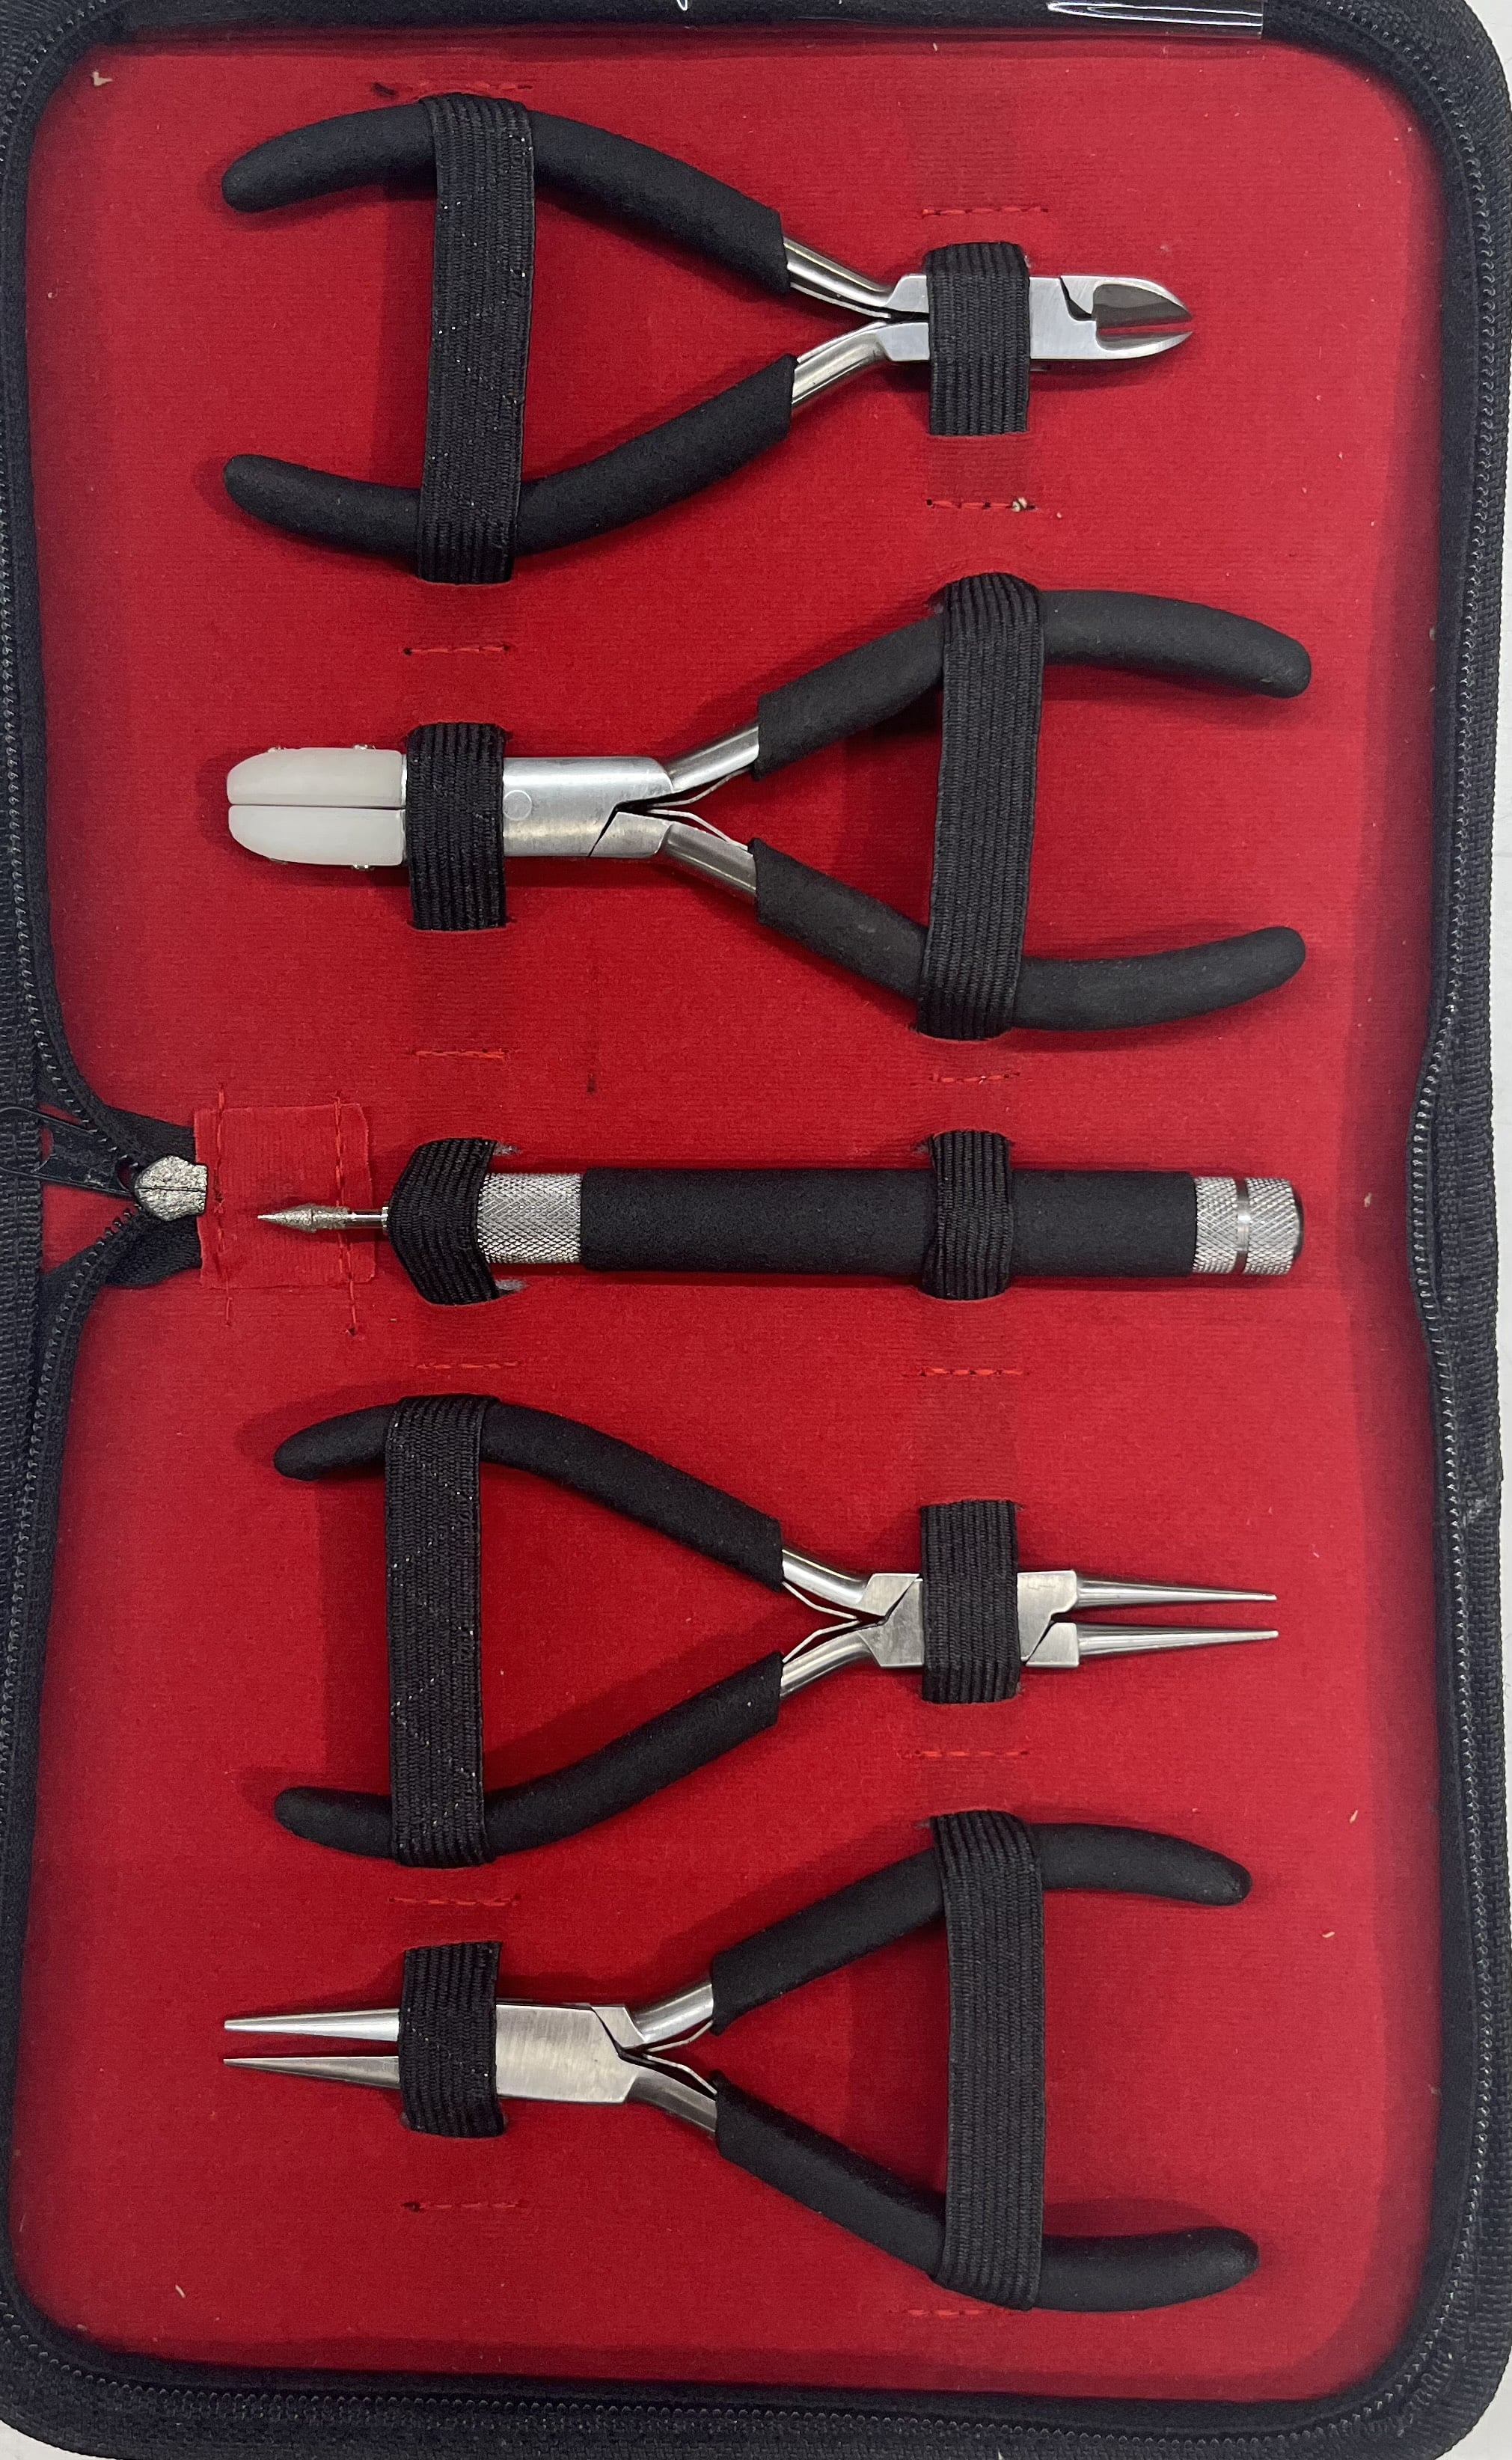 Tool Kit by ParaWire - quality tools, comfort grip handles, nifty